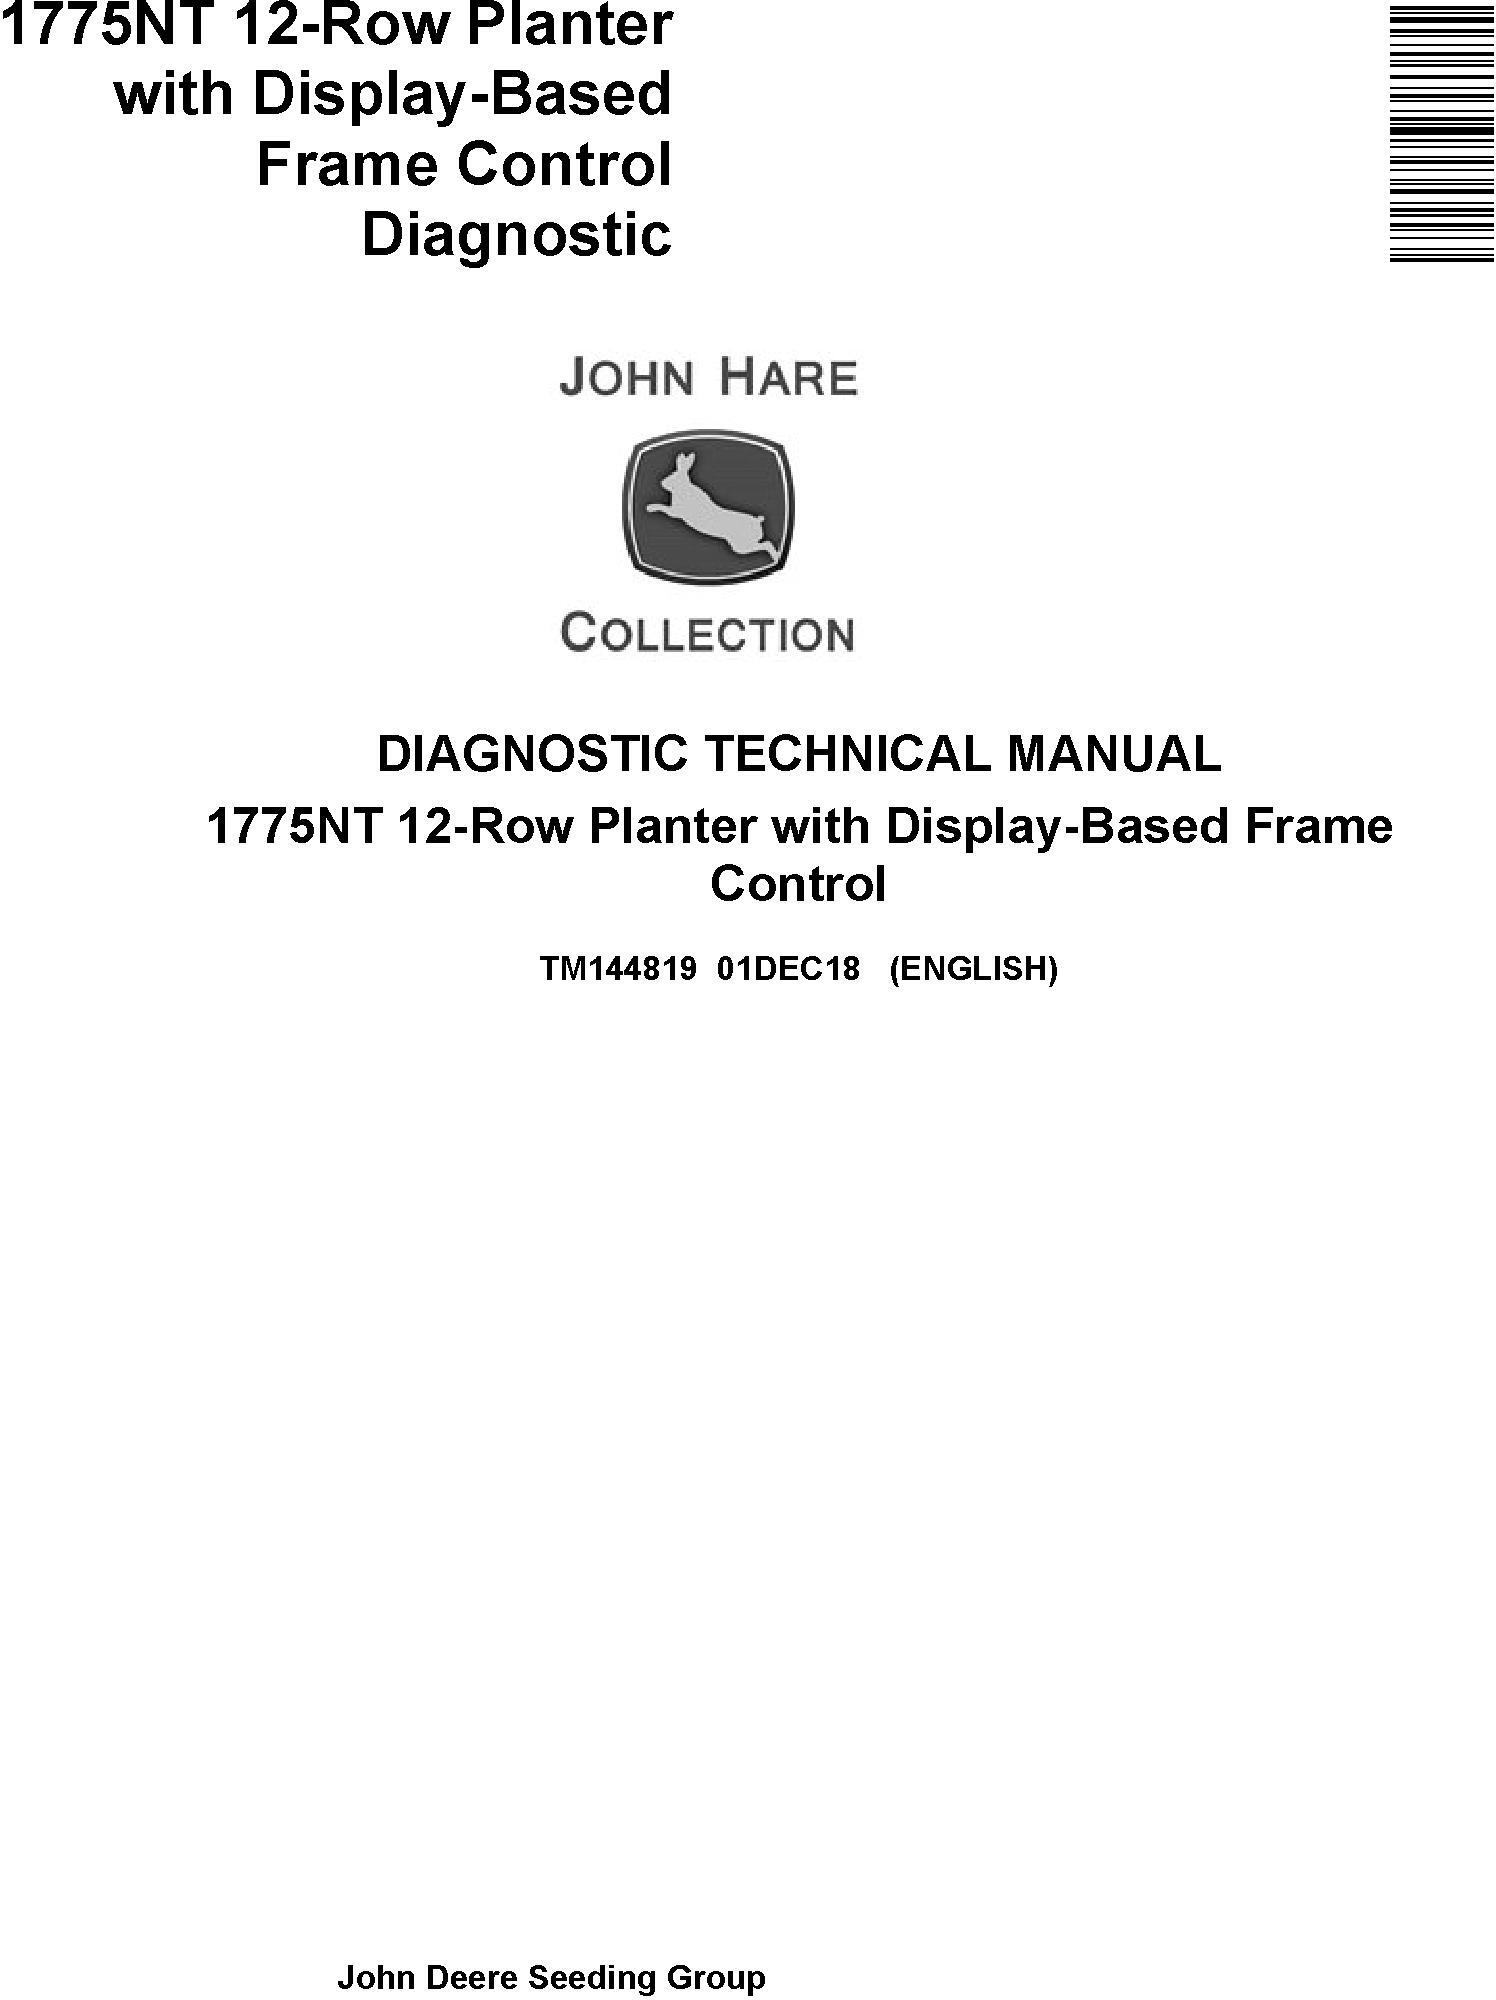 John Deere 1775NT 12-Row Planter with Display-Based Frame Control Diagnostic Technical Manual (TM144819) - 19270